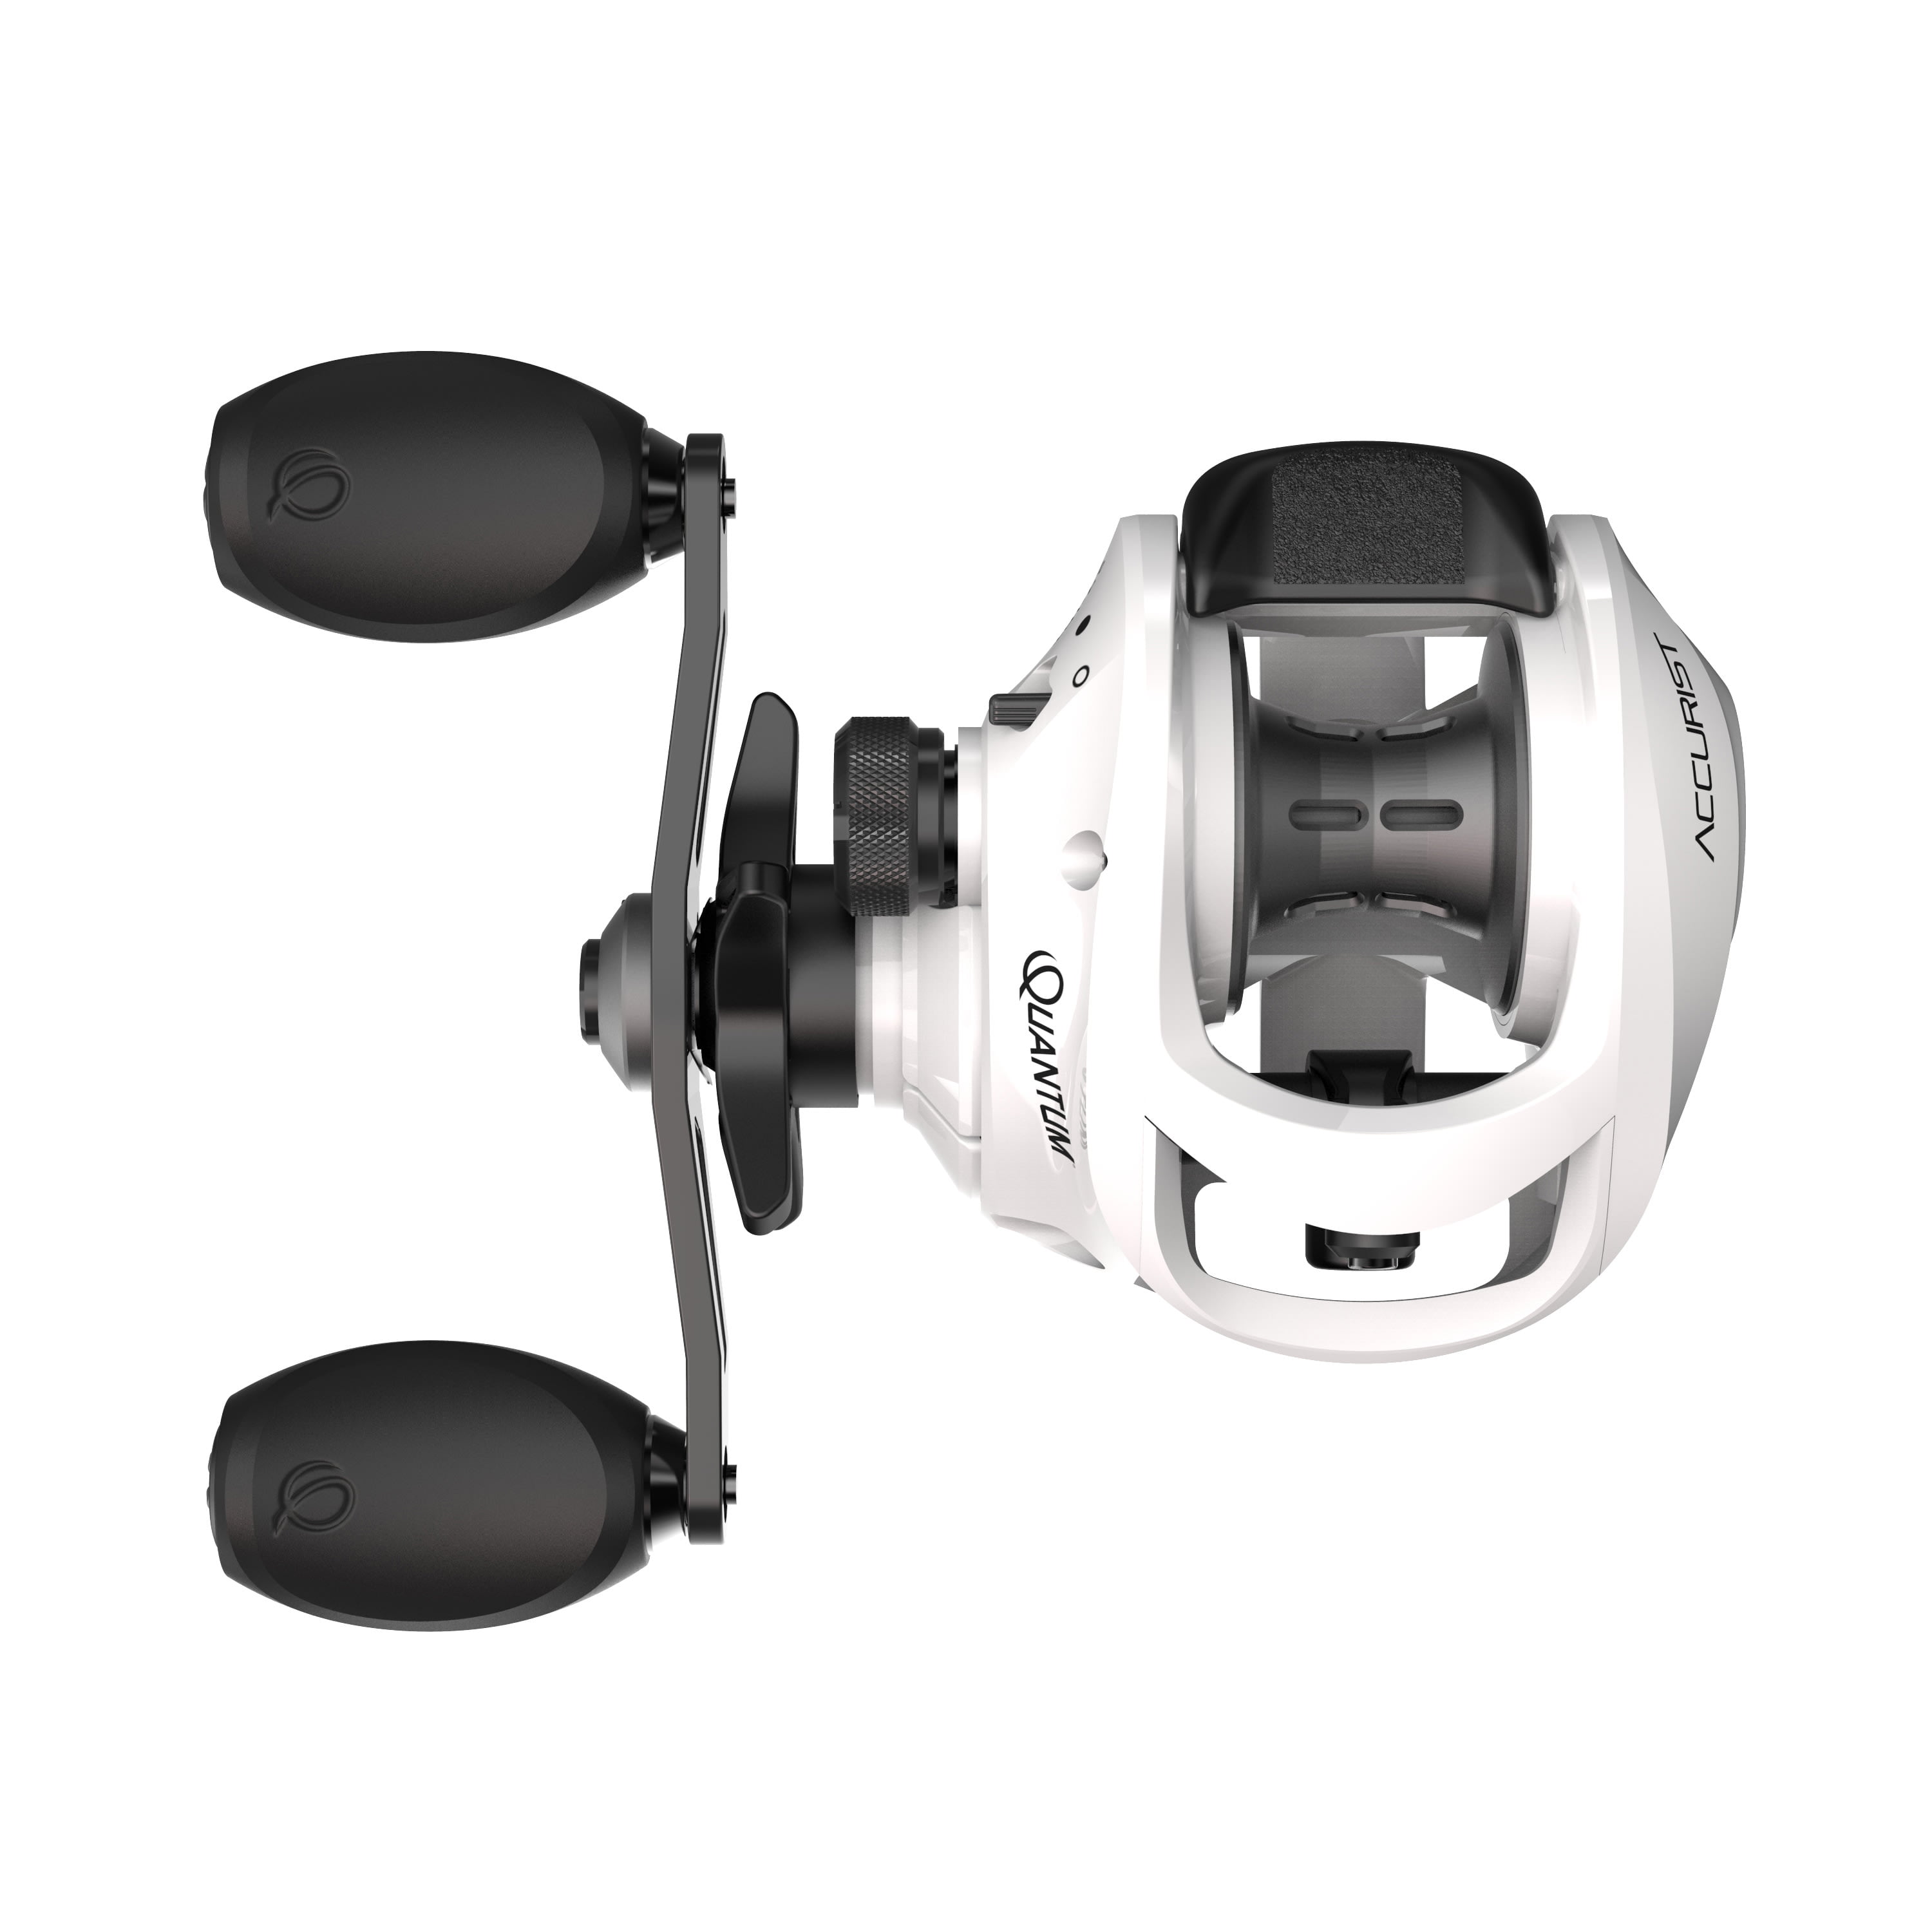  Quantum Throttle Baitcast Fishing Reel, Size 100 Reel,  Right-Hand Retrieve, Lightweight Graphite Frame and Side Covers, Continuous  Anti-Reverse Clutch, 7.3:1 Gear Ratio, Silver/Black : Sports & Outdoors